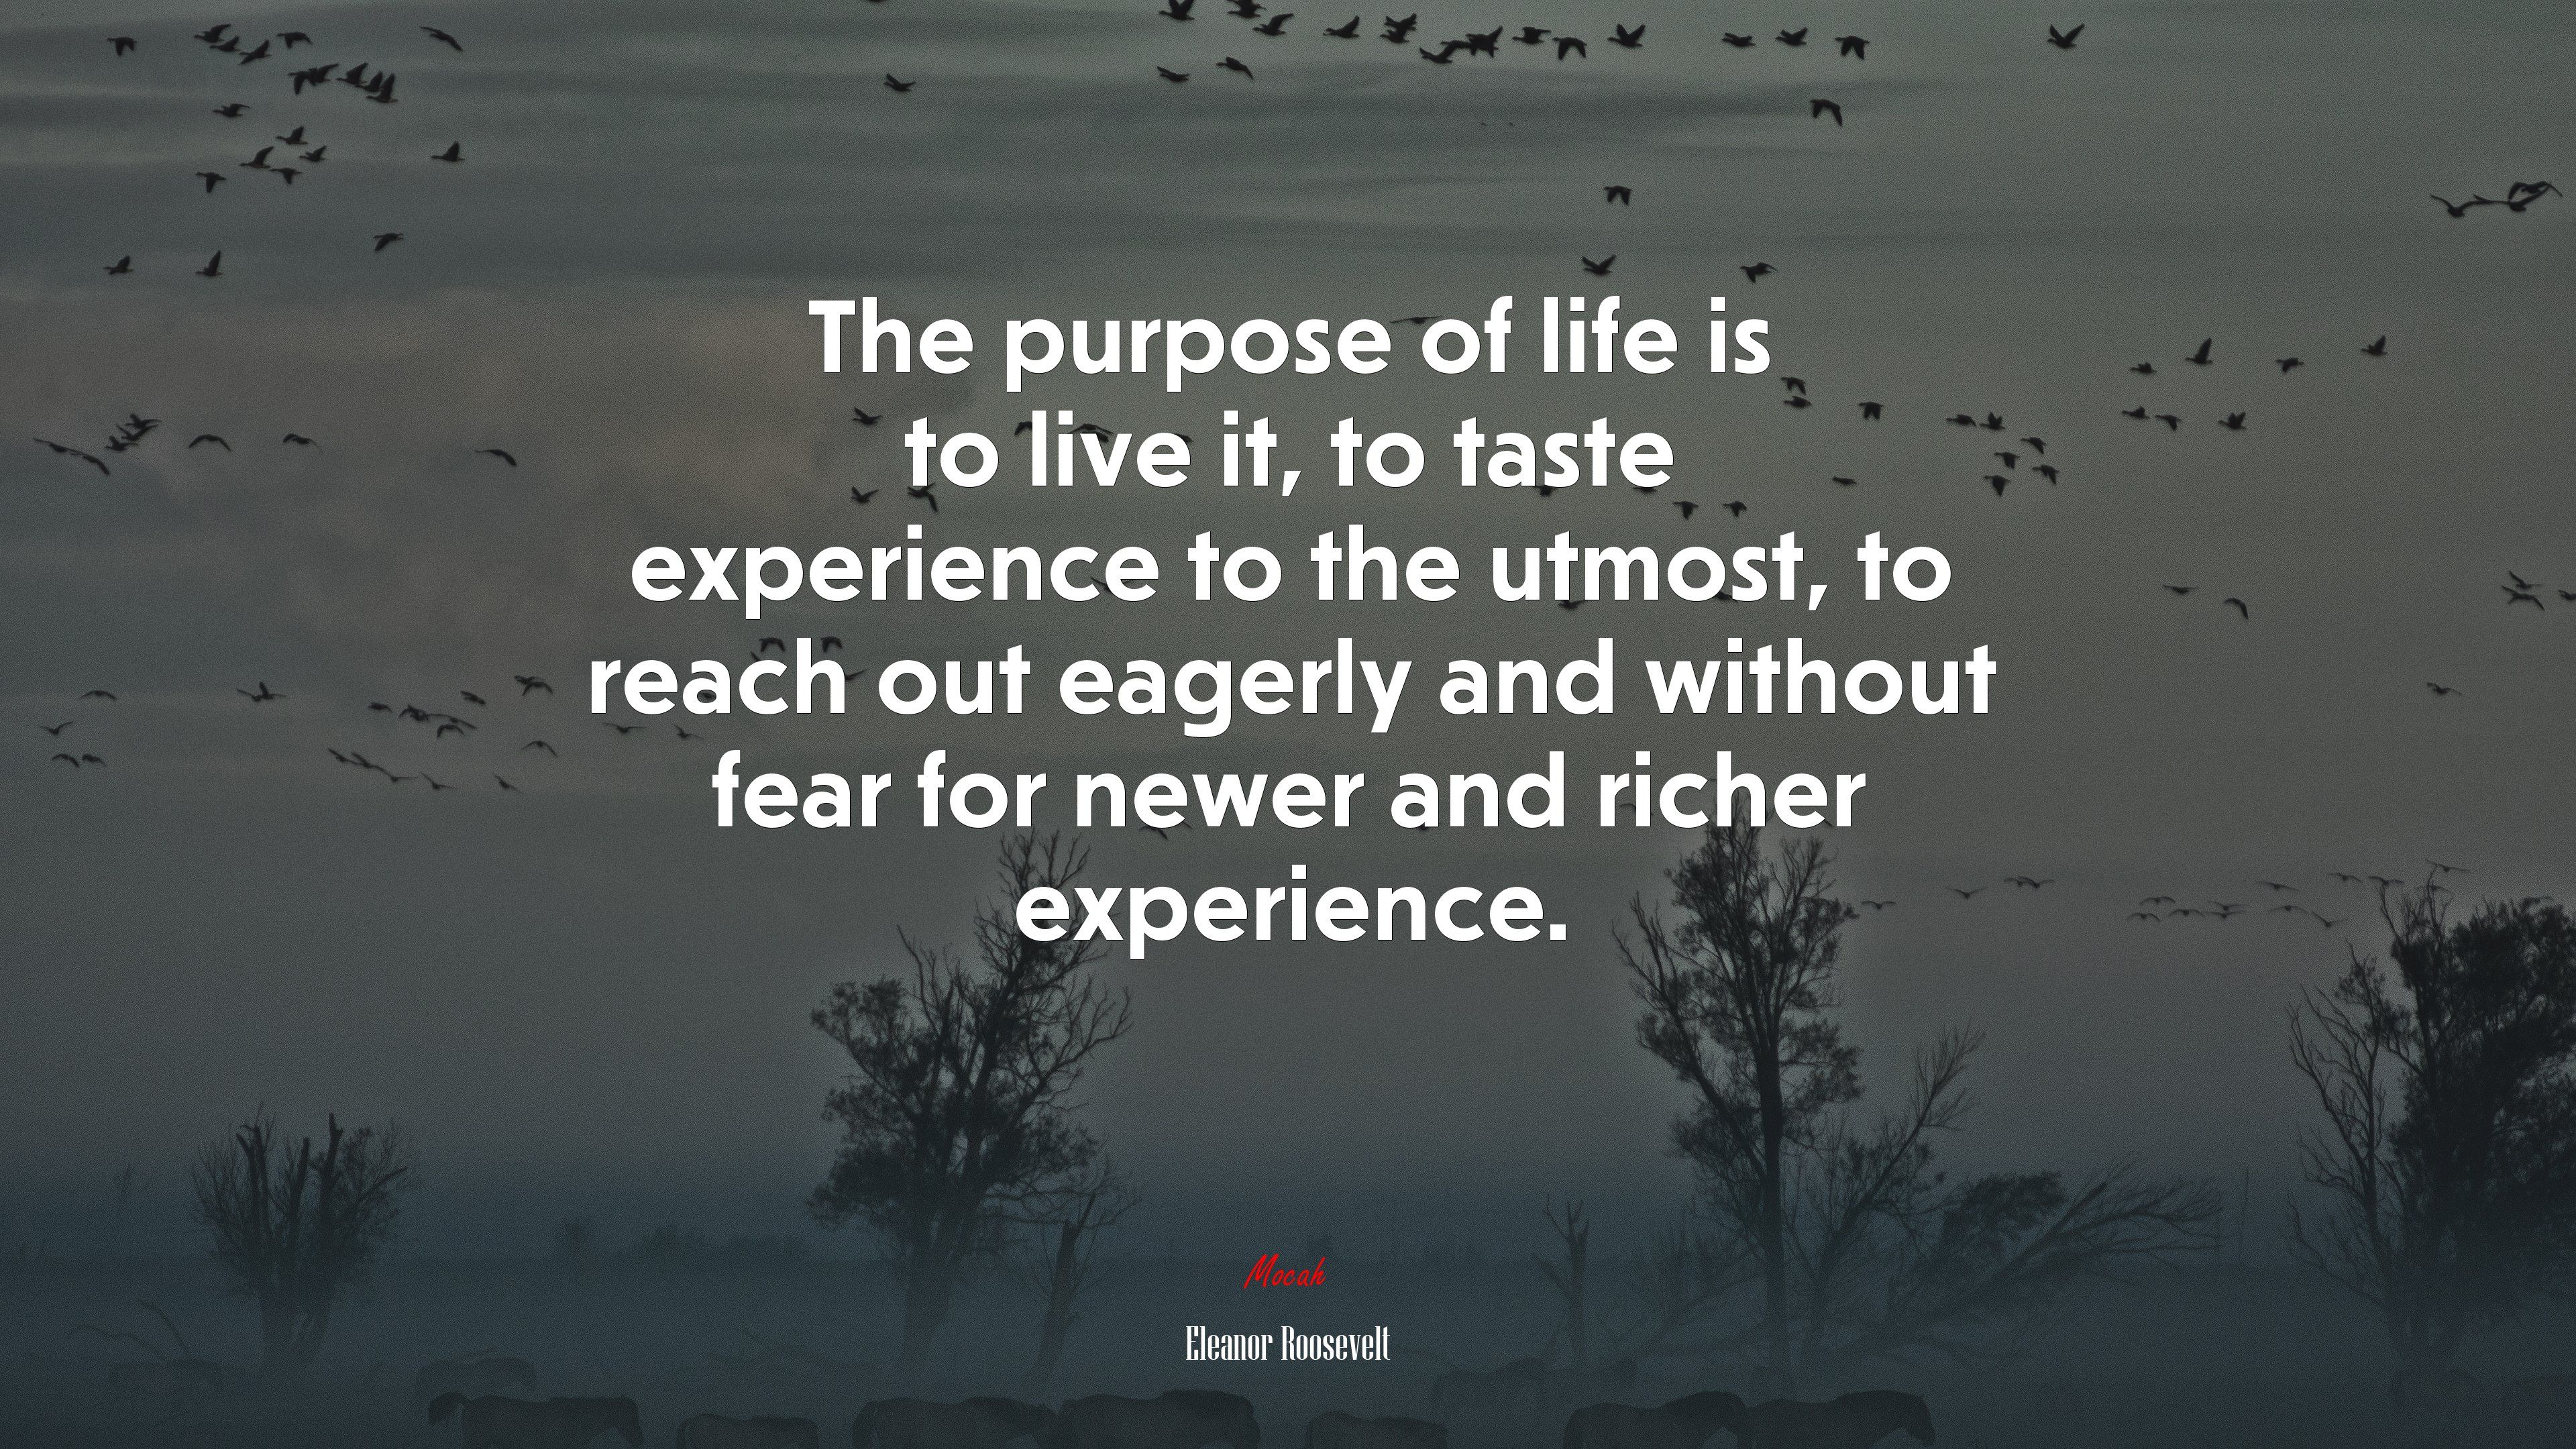 The purpose of life is to live it, to taste experience to the utmost, to reach out eagerly and without fear for newer and richer experience. Eleanor Roosevelt quote, 4k